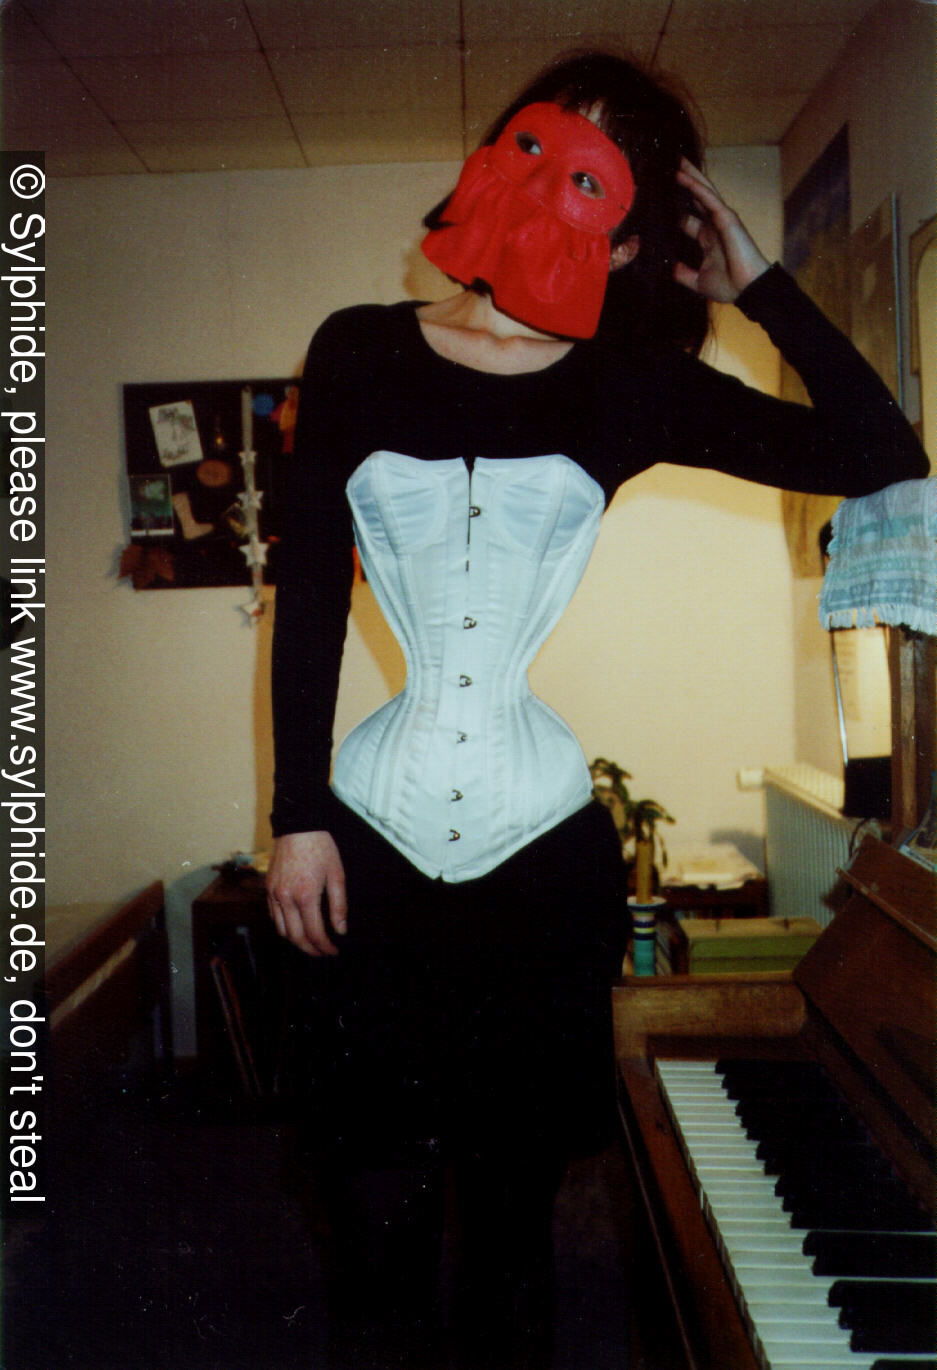 Sylphide in 17 inch satin corset fully laced standing at piano